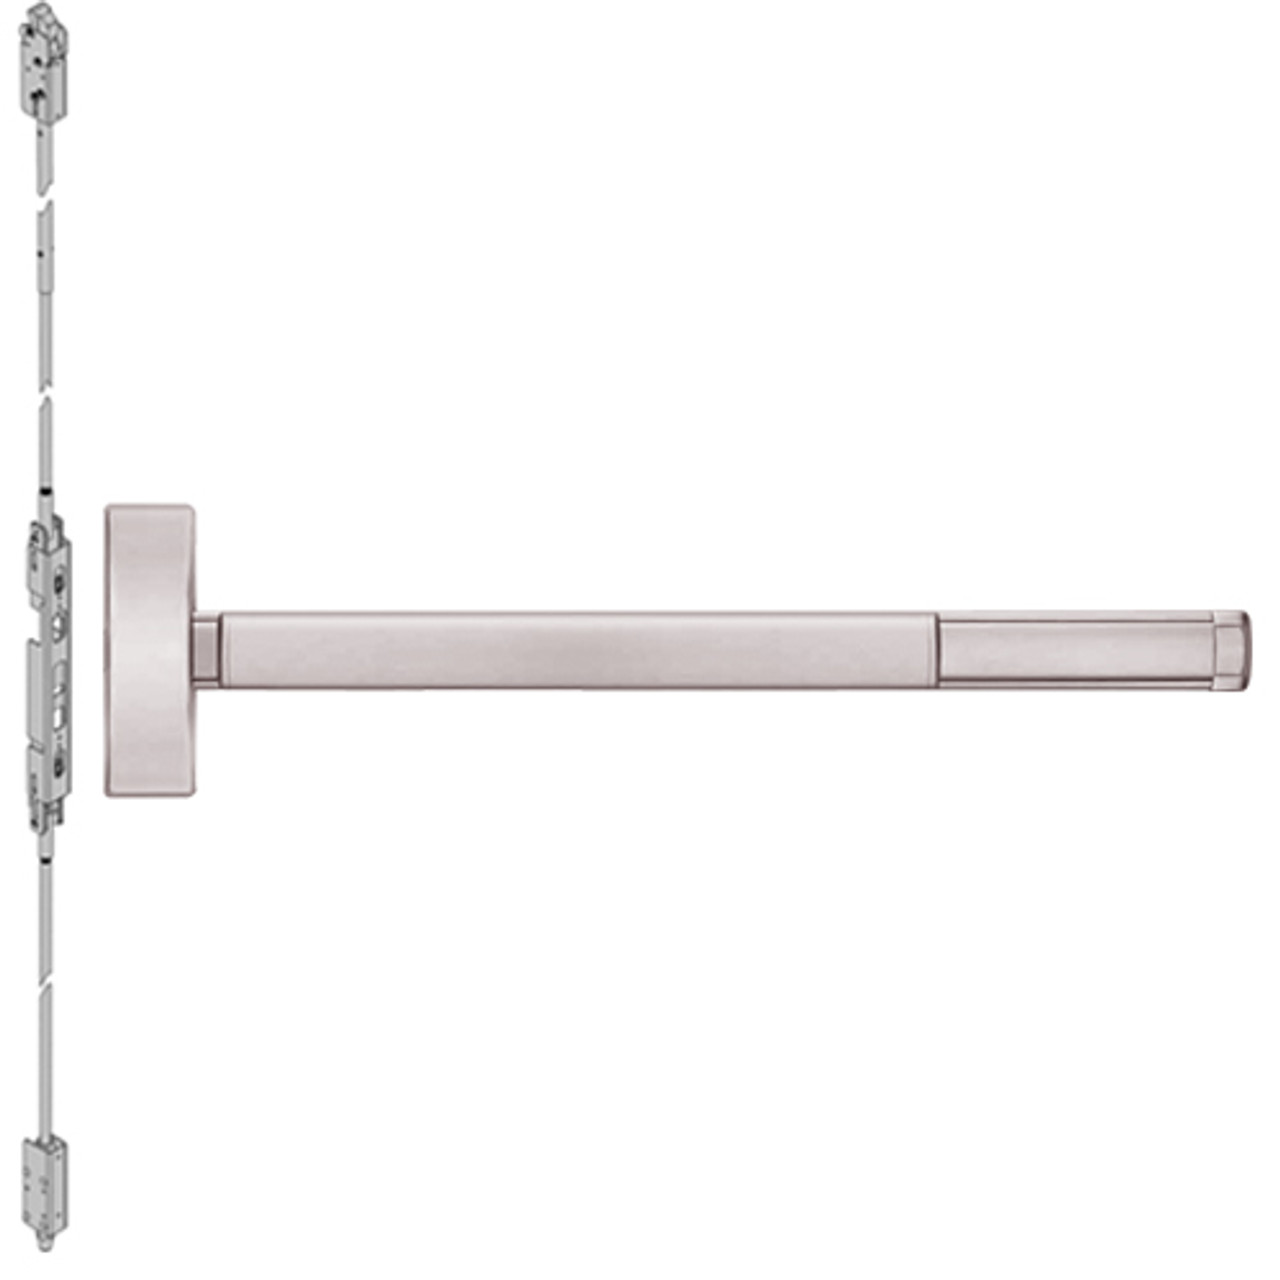 ELR2808LBR-628-36 PHI 2800 Series Concealed Vertical Rod Exit Device with Electric Latch Retraction Prepped for Key Controls Lever-Knob in Satin Aluminum Finish